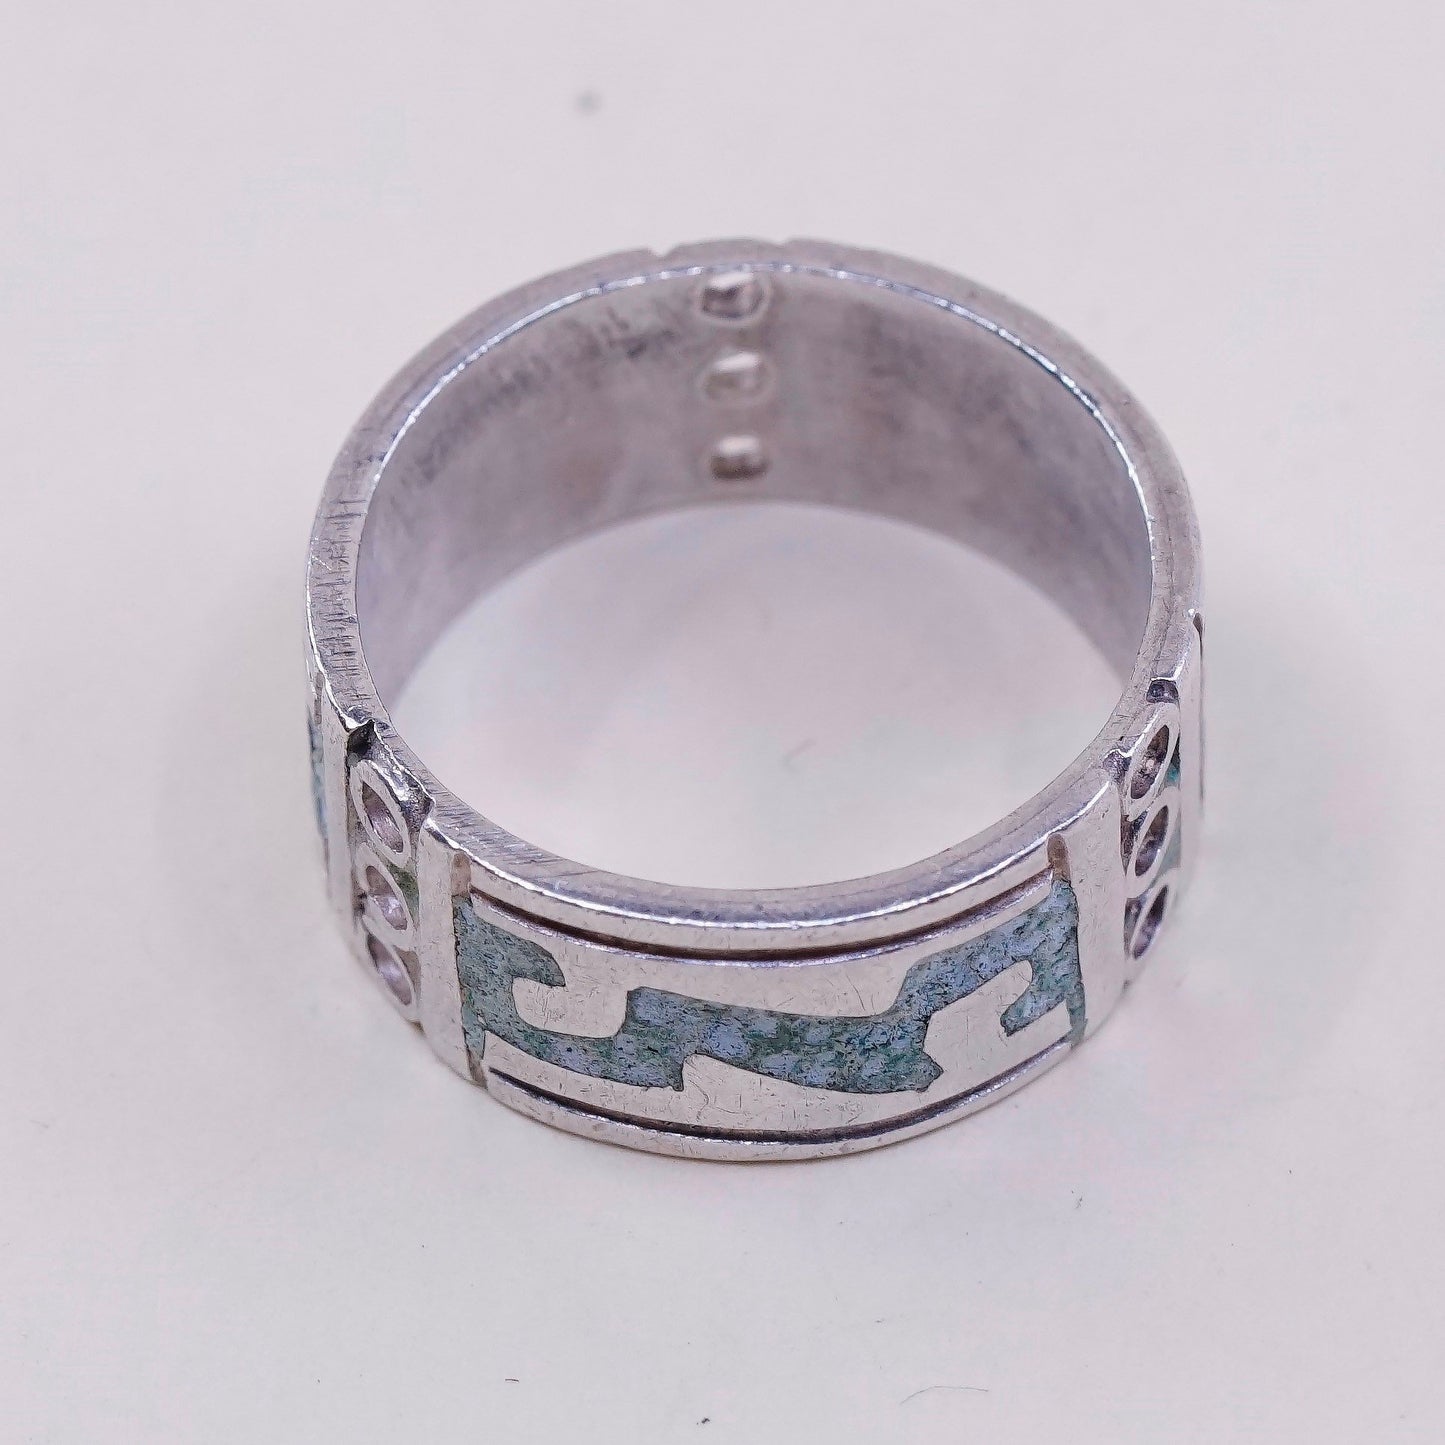 sz 8, VTG taxco mexico Sterling 925 silver handmade ring band w/ turquoise